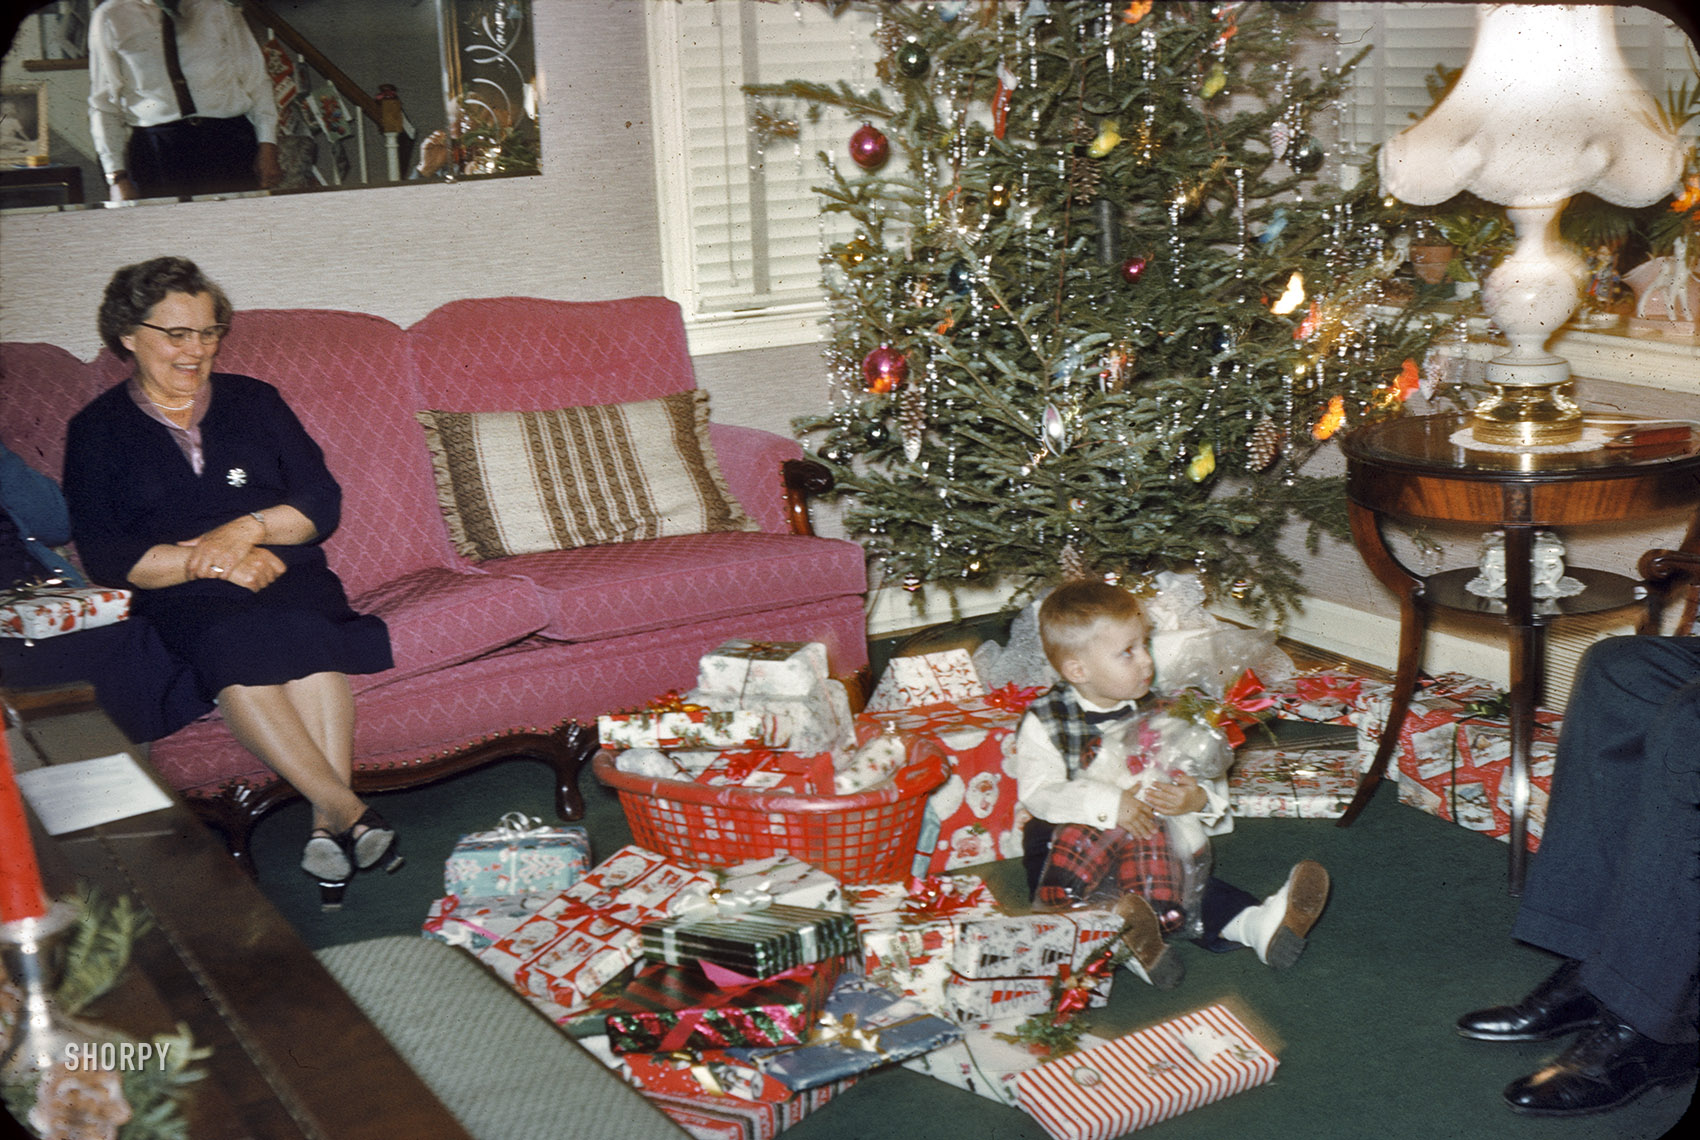 Our young Pennsylvanian at the intersection of Christmas Past and Christmas presents, shortly before he disappeared in an avalanche of gift wrap. Merry Christmas from Shorpy! 35mm Kodachrome slide. View full size.